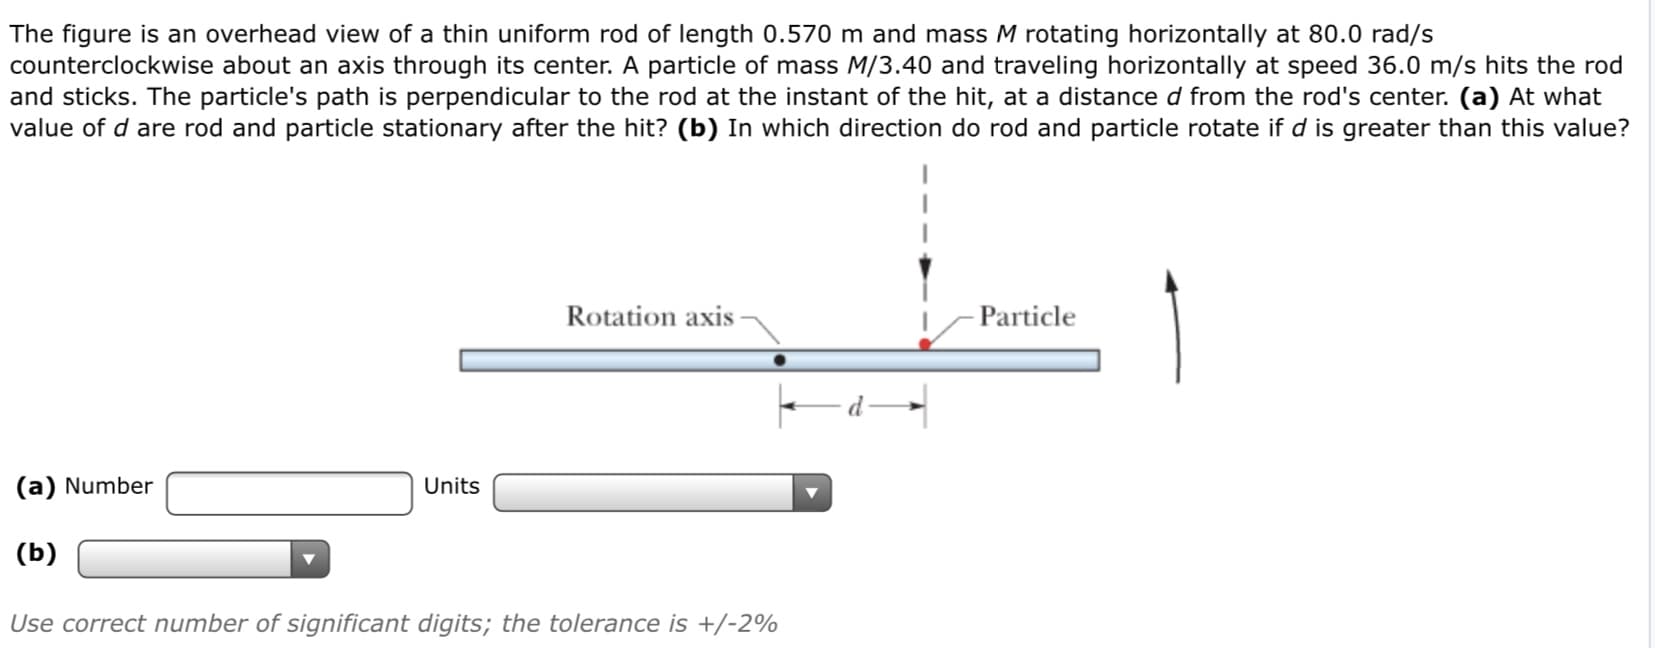 The figure is an overhead view of a thin uniform rod of length 0.570 m and mass M rotating horizontally at 80.0 rad/s
counterclockwise about an axis through its center. A particle of mass M/3.40 and traveling horizontally at speed 36.0 m/s hits the rod
and sticks. The particle's path is perpendicular to the rod at the instant of the hit, at a distance d from the rod's center. (a) At what
value of d are rod and particle stationary after the hit? (b) In which direction do rod and particle rotate if d is greater than this value?
Rotation axis -
- Particle
(a) Number
Units
(b)
Use correct number of significant digits; the tolerance is +/-2%
